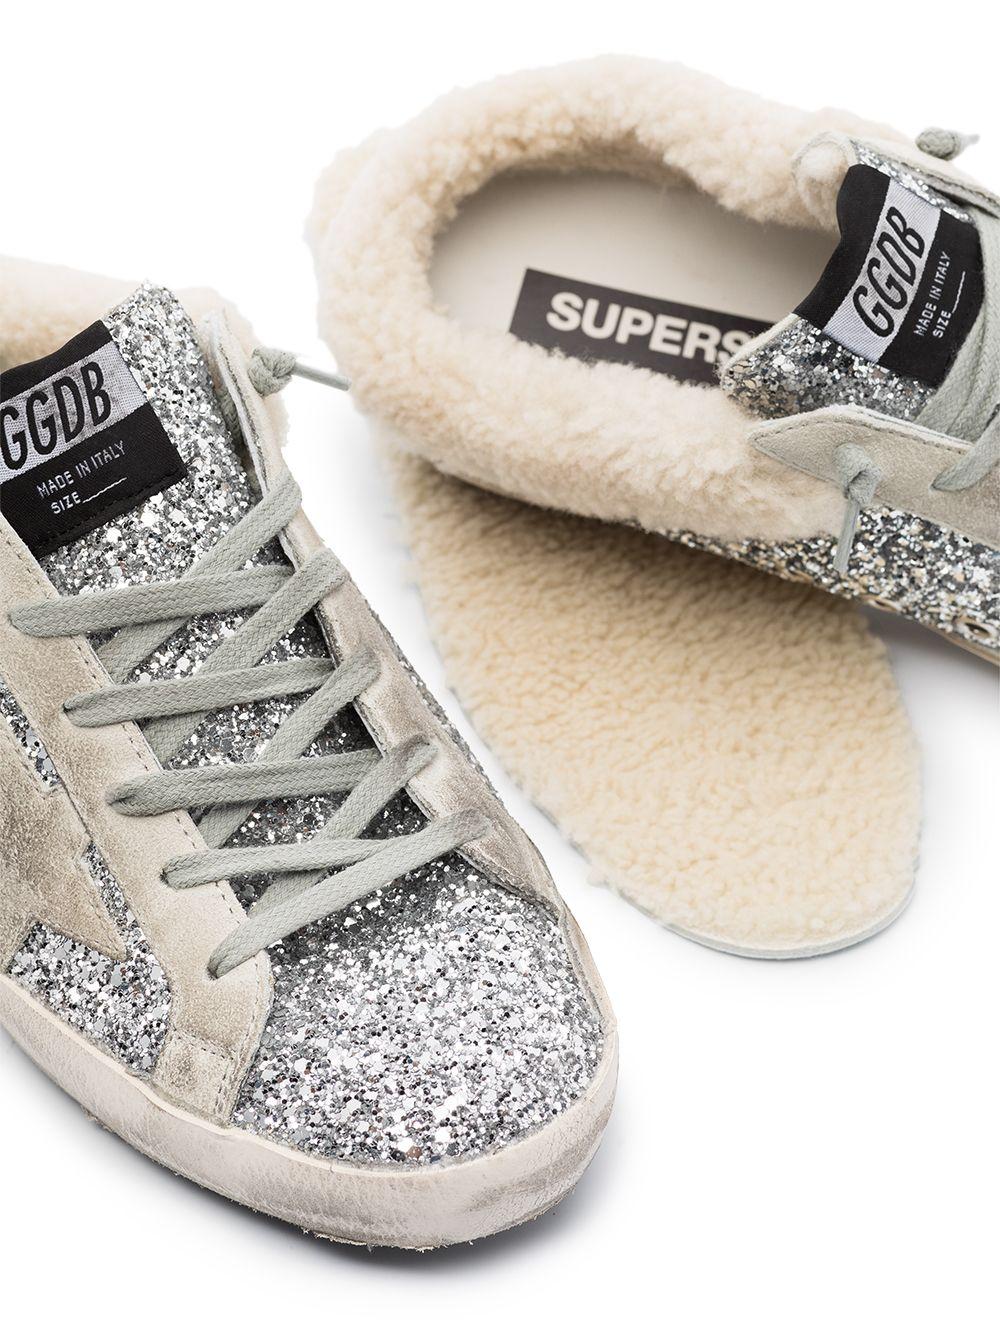 Golden Goose Sabot Shearling And Glittered Slip-on Sneakers in Metallic |  Lyst